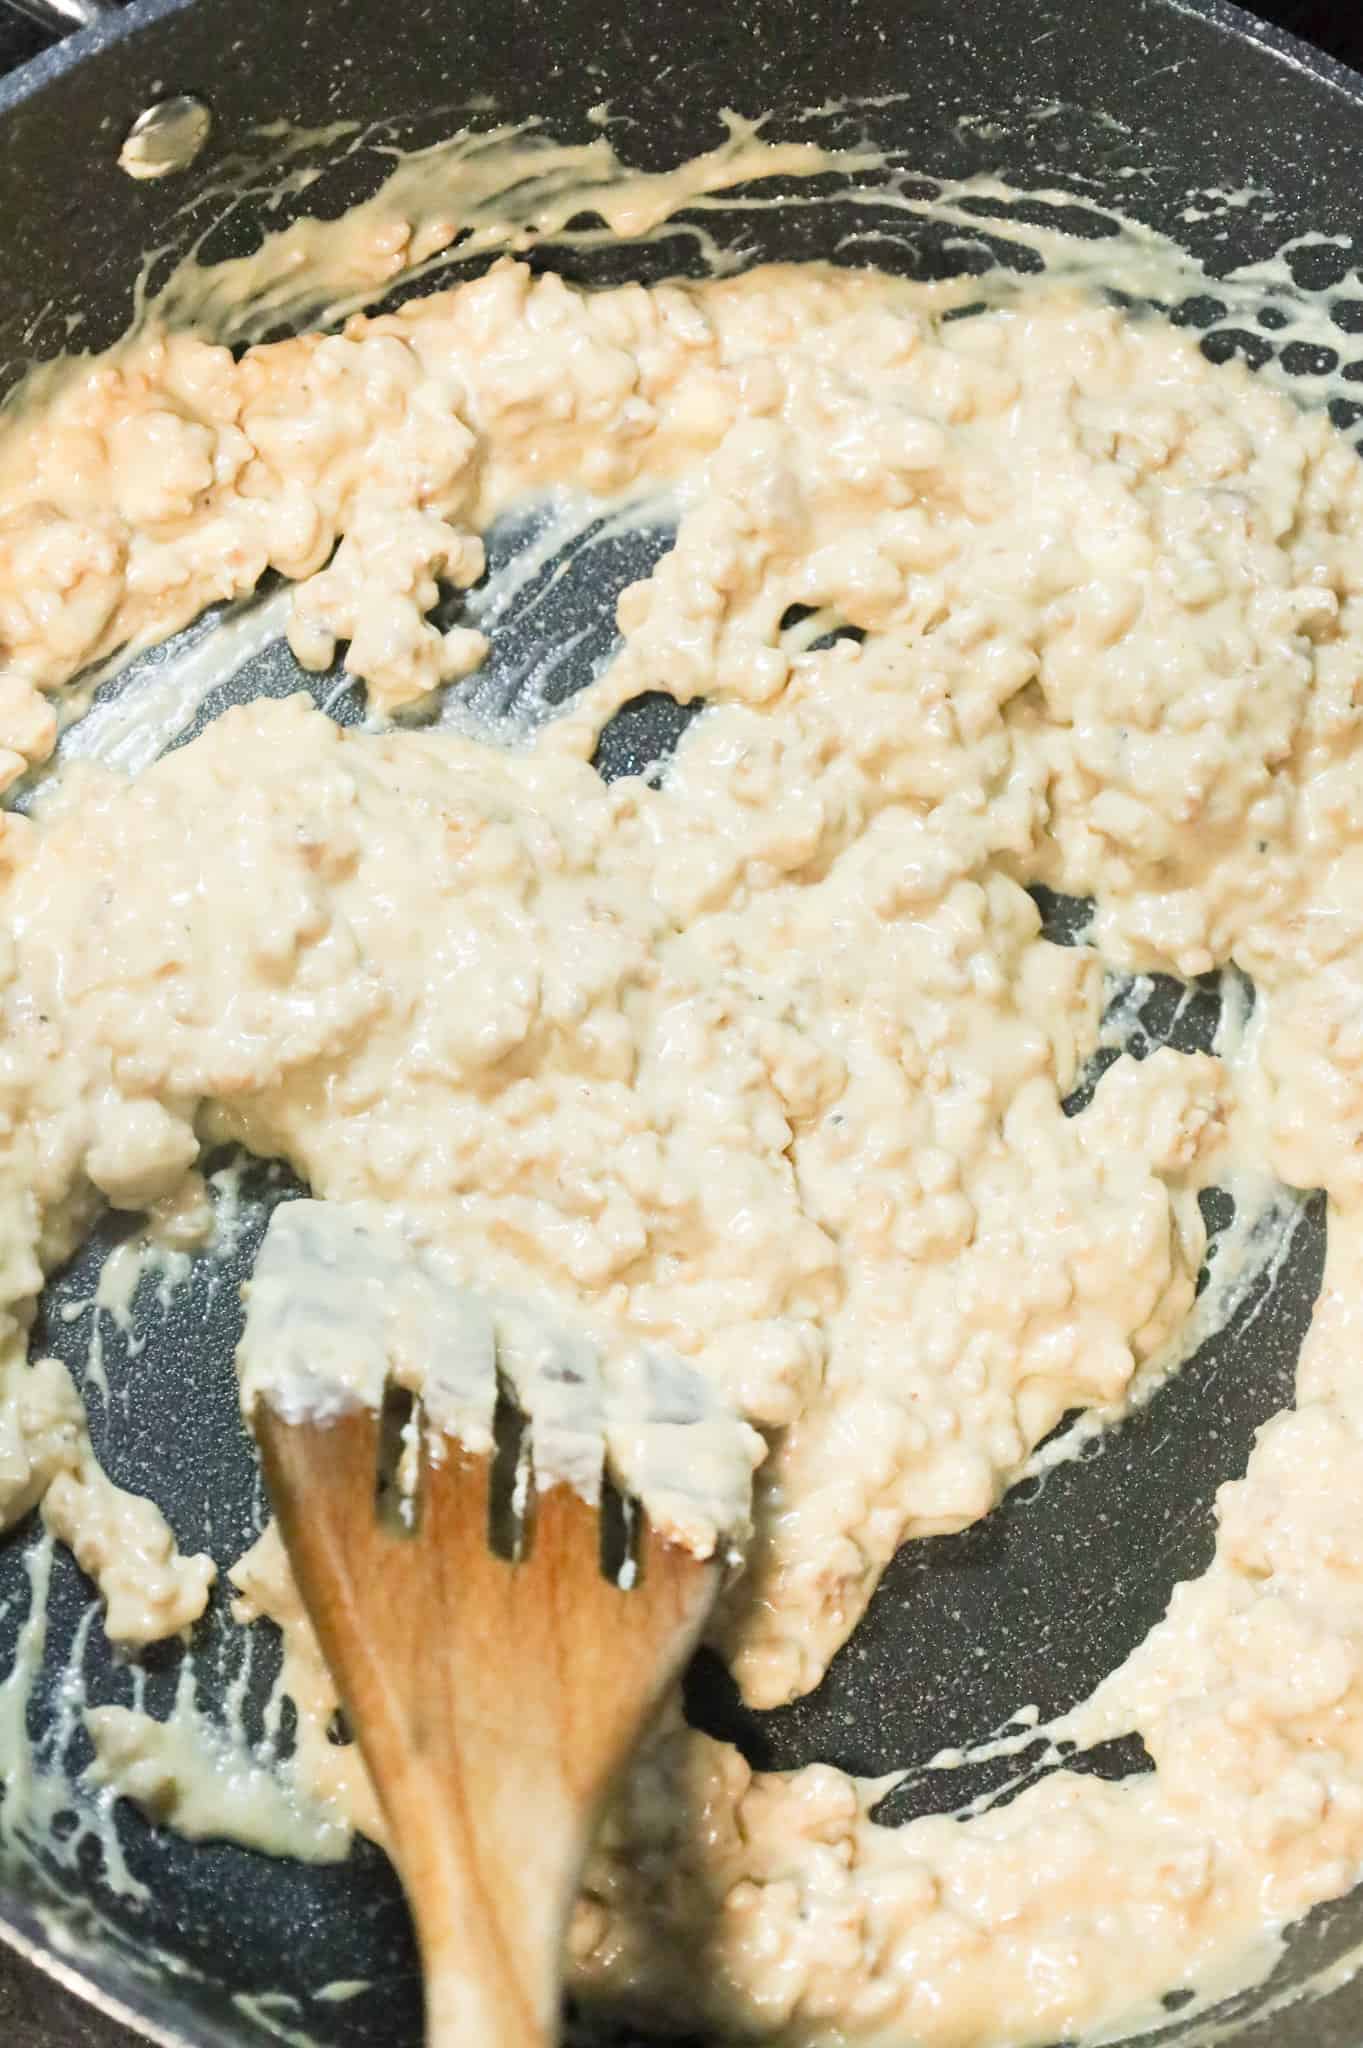 cream cheese and sausage mixture in a skillet